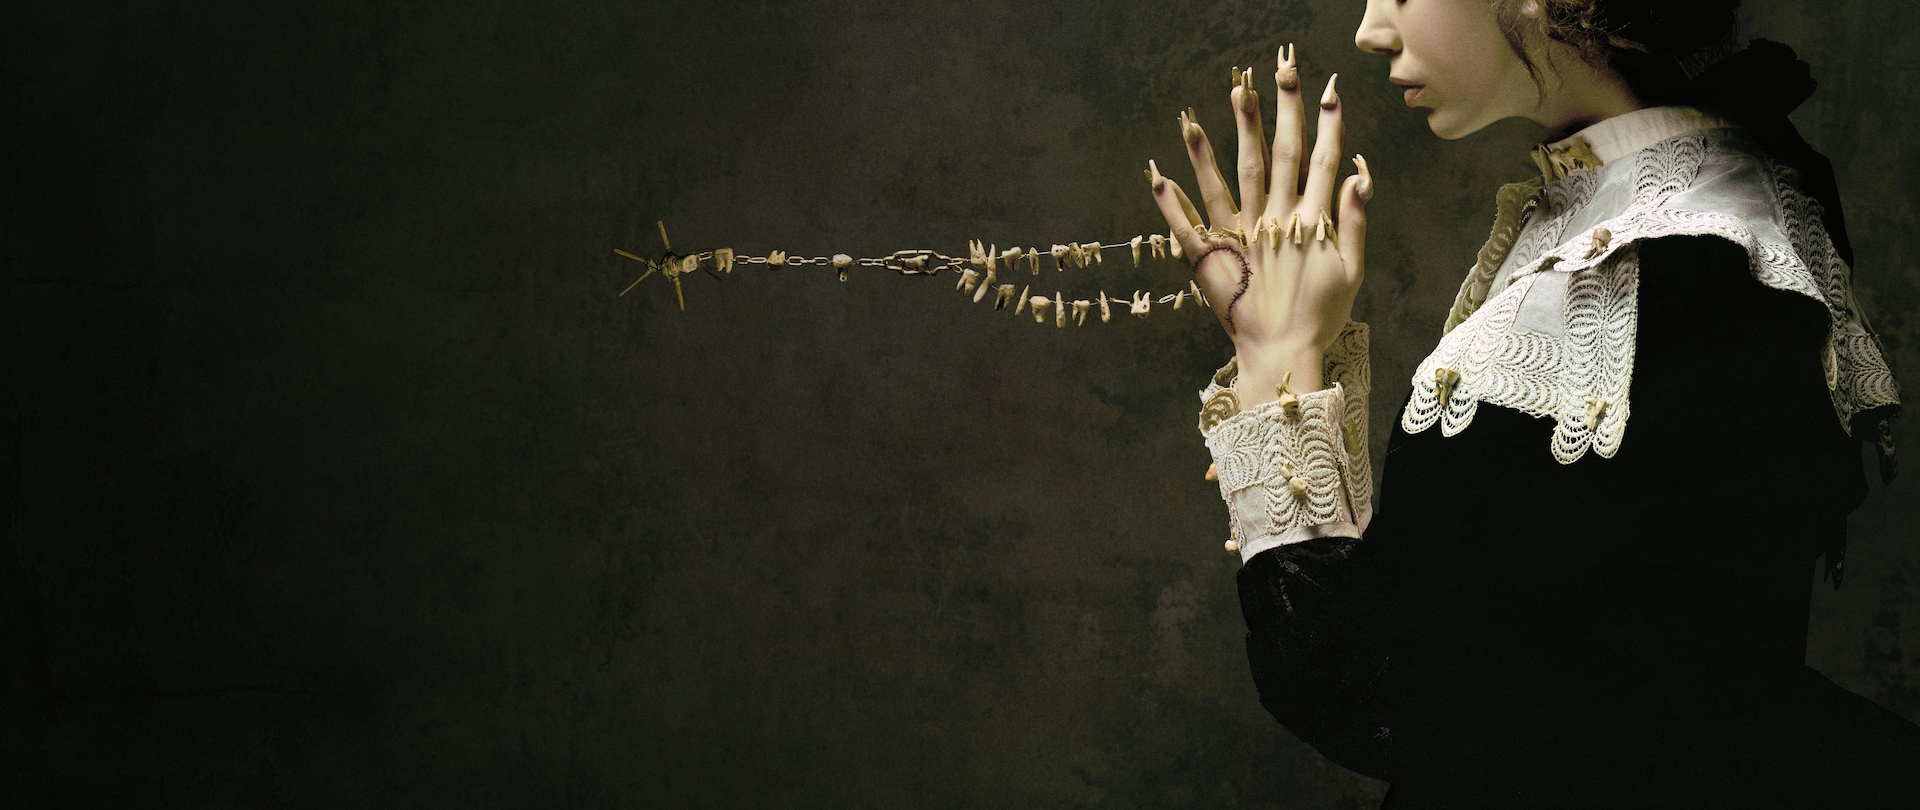 Woman in black dress with white collar and cuffs decorated with teeth, hands in prayer with nails replaced with teeth